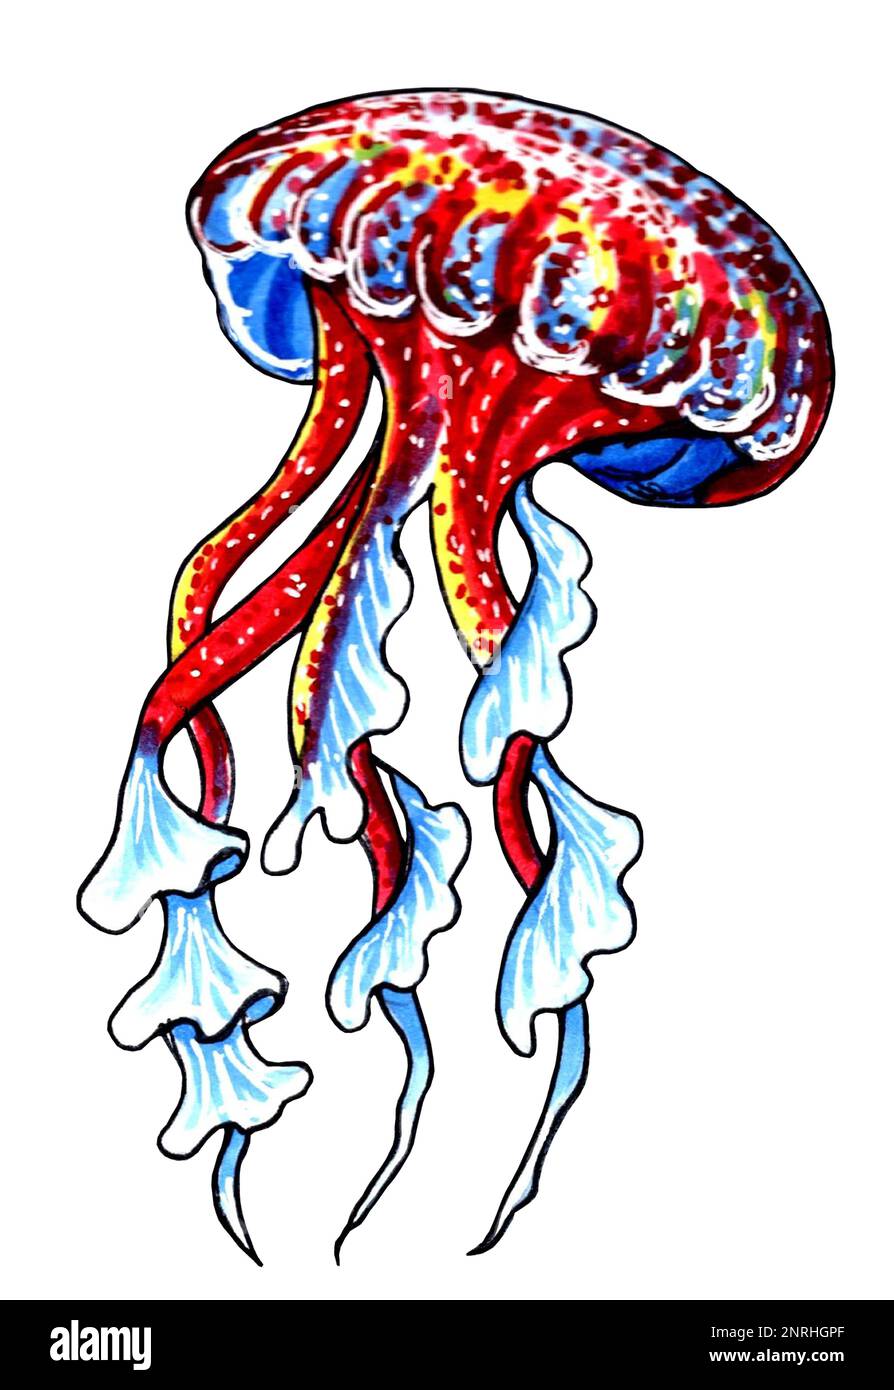 Red and blue jellyfish with wavy tentacles. JPEG illustration marine animals. Stock Photo